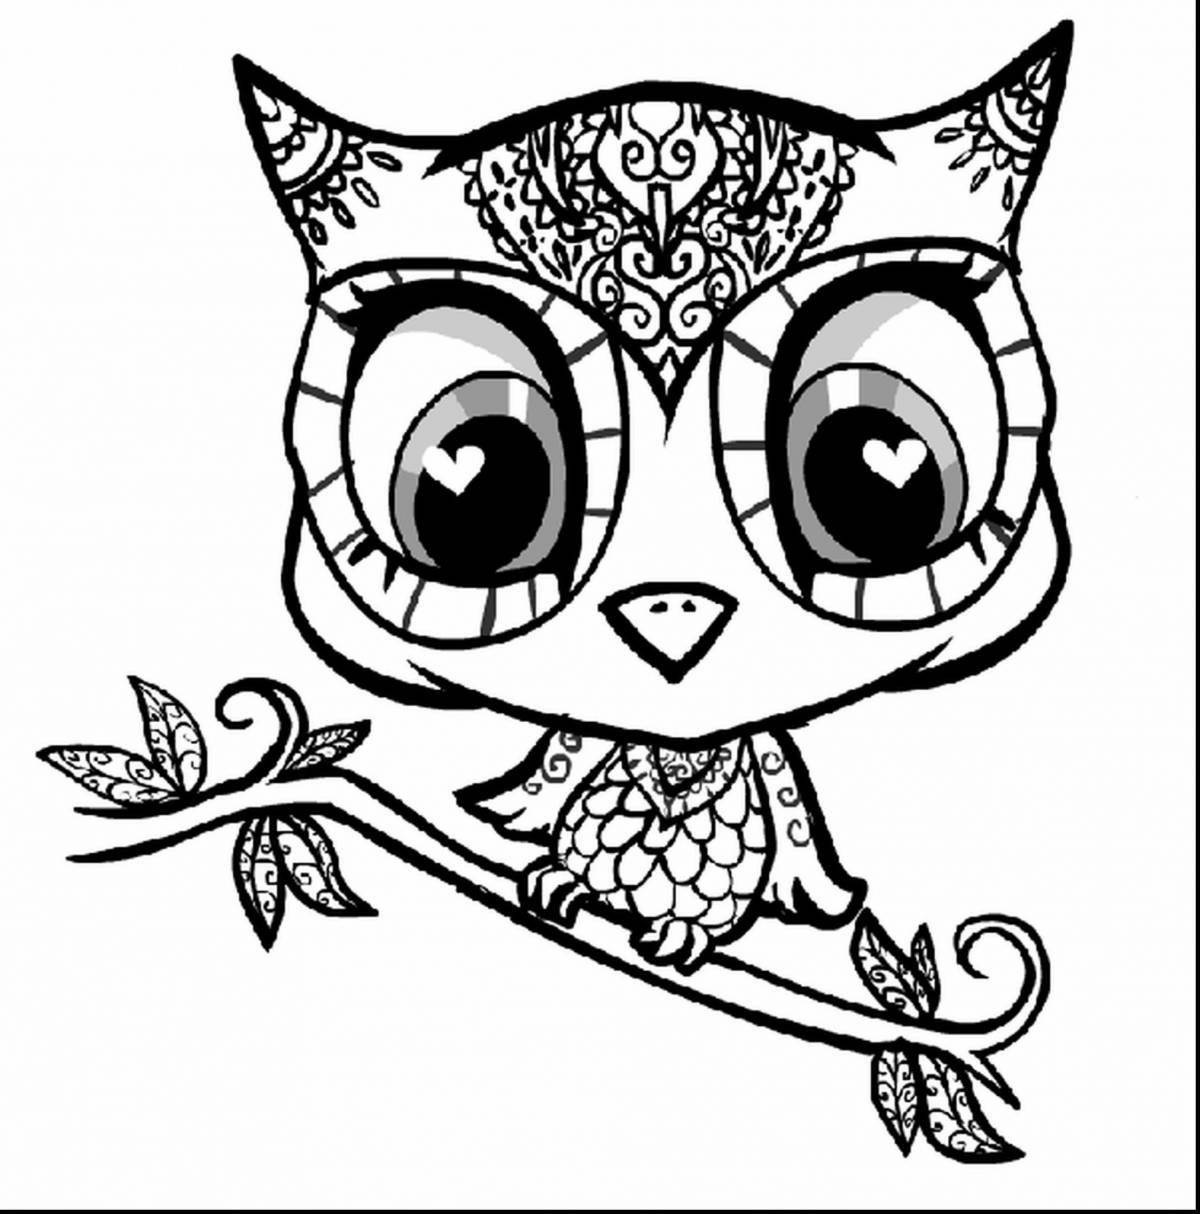 Amazing zooba coloring page